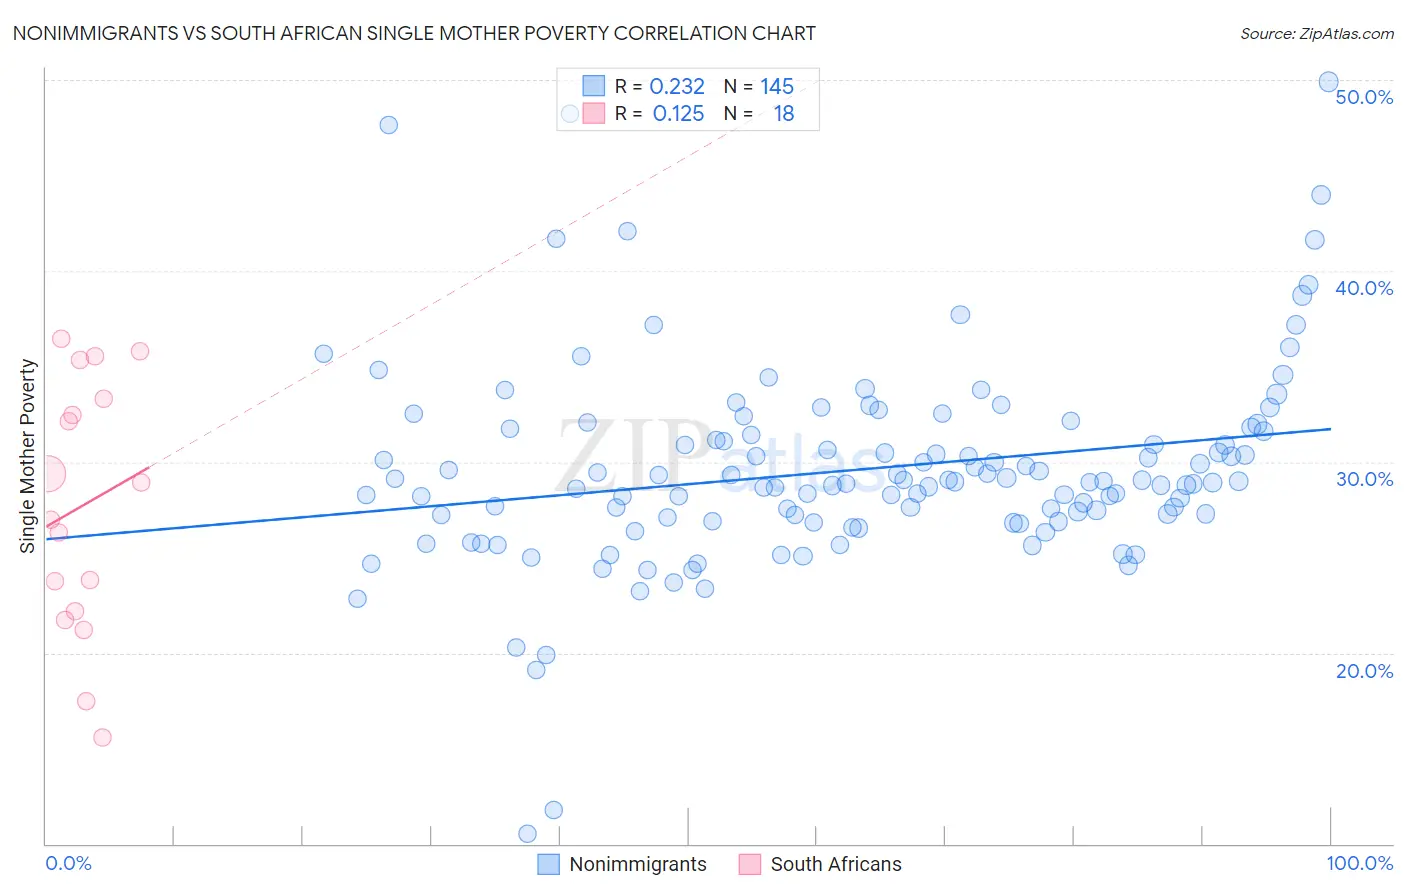 Nonimmigrants vs South African Single Mother Poverty